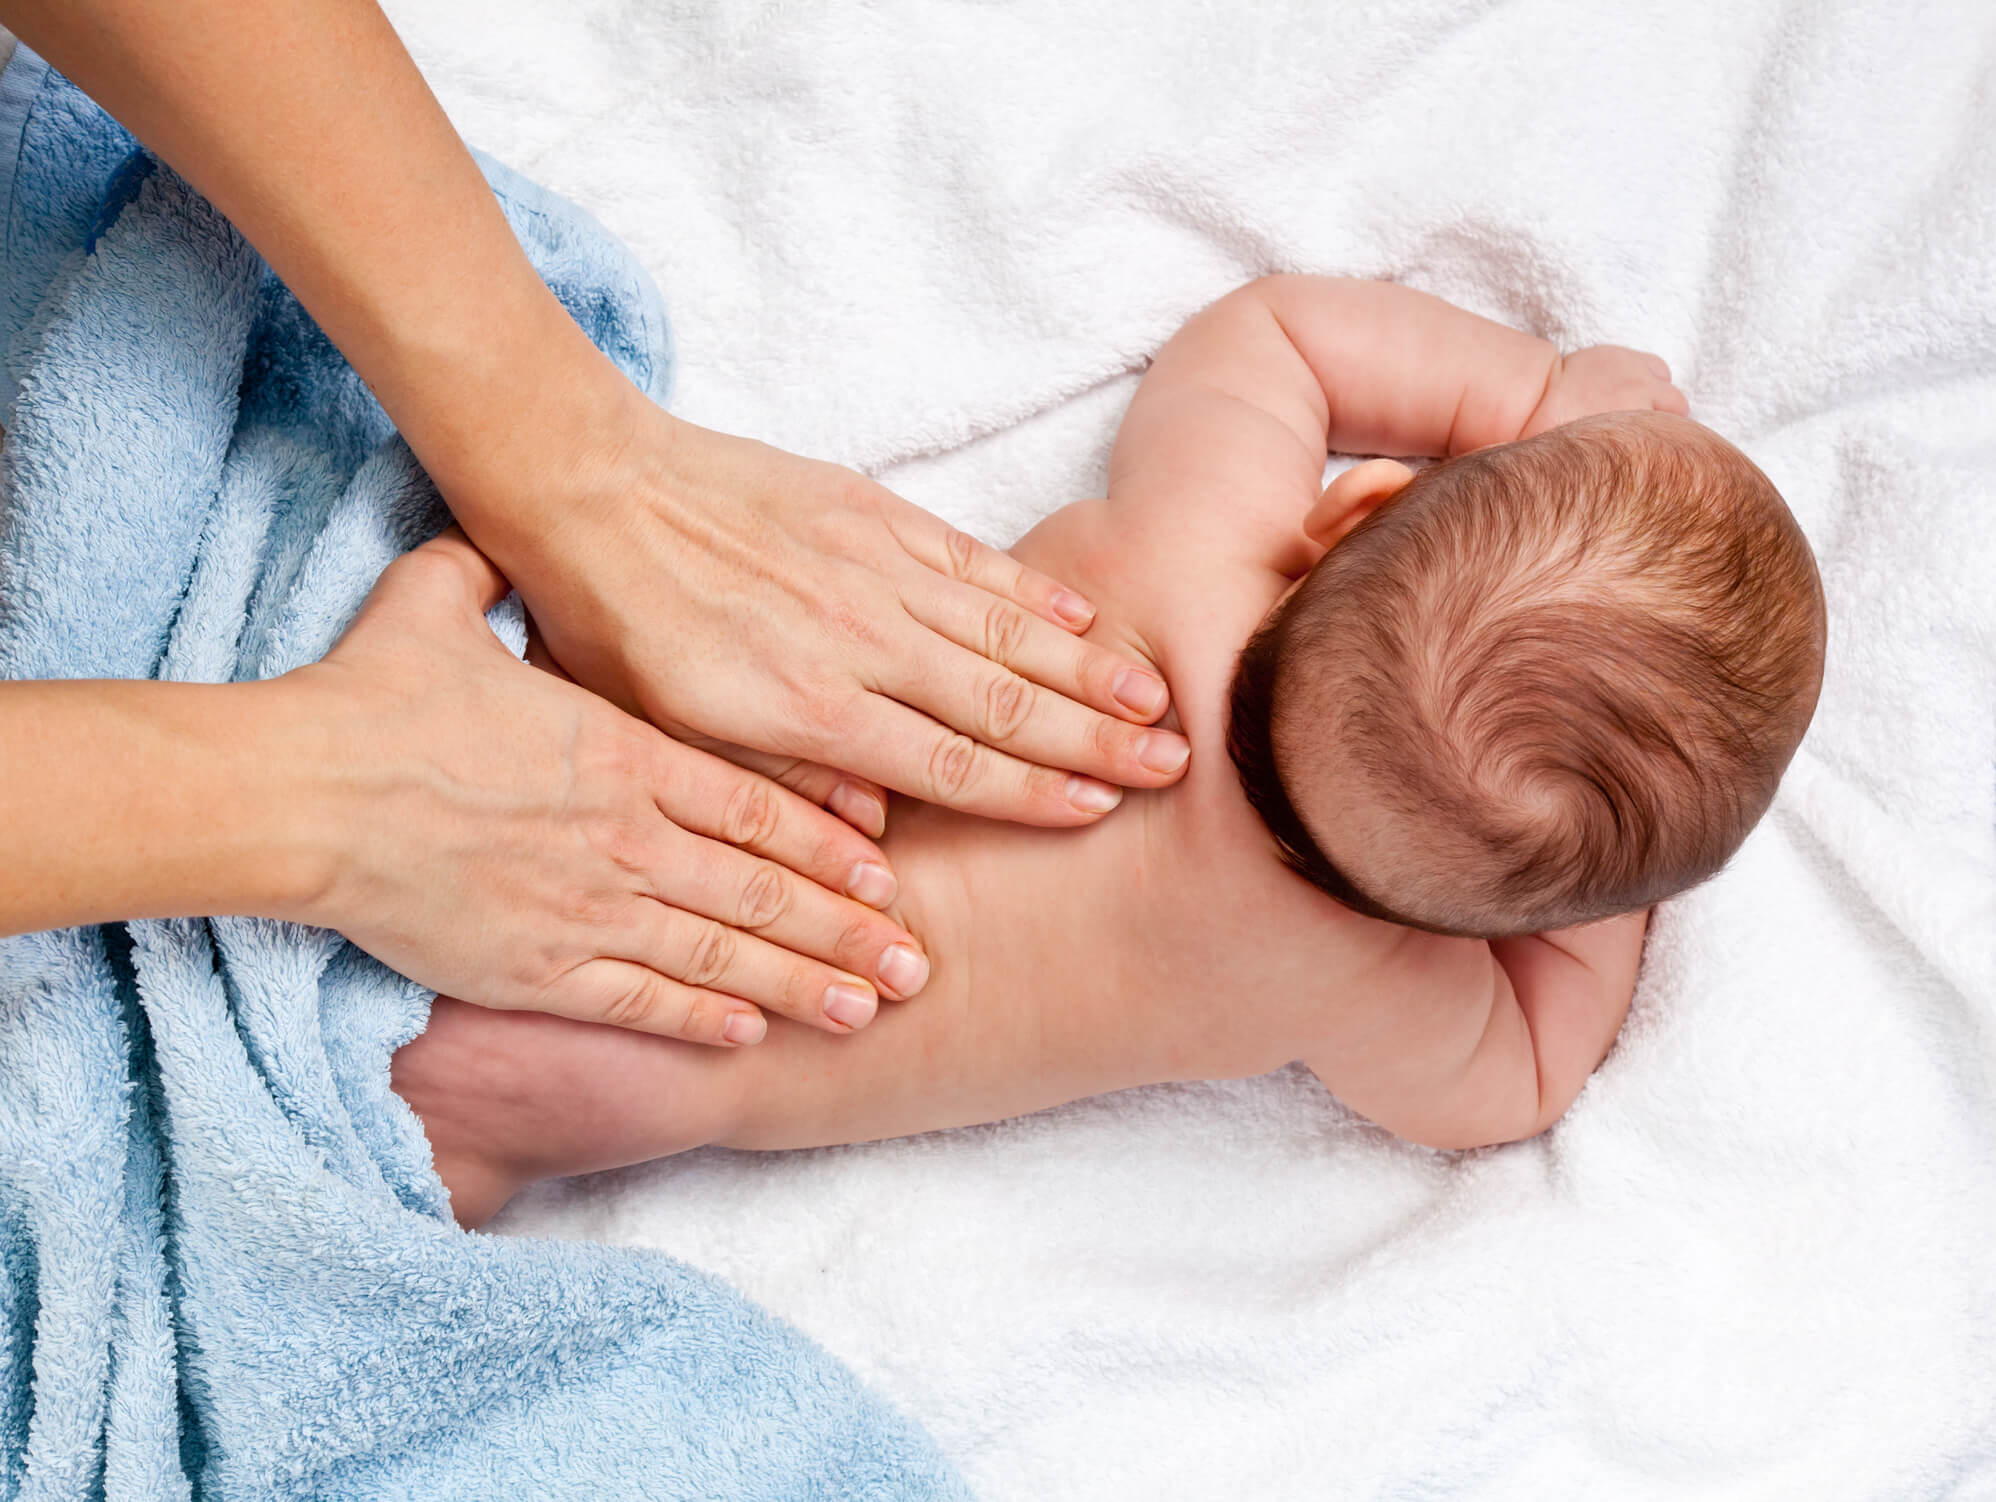 11 Reasons Every Parent Should Learn Baby Massage